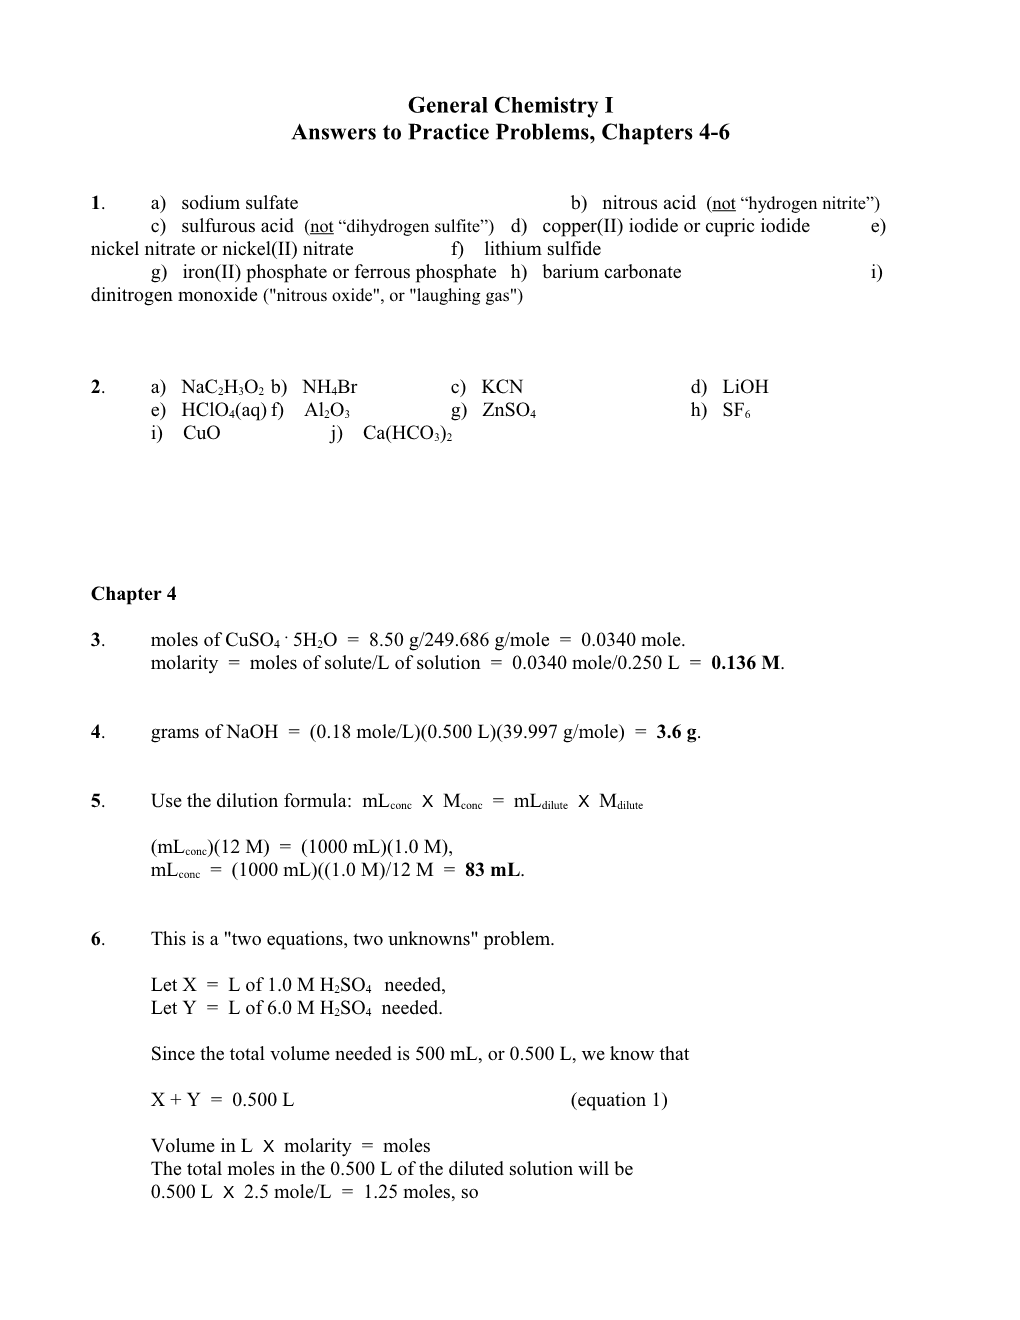 Answers to Practice Problems, Chapters 4-6